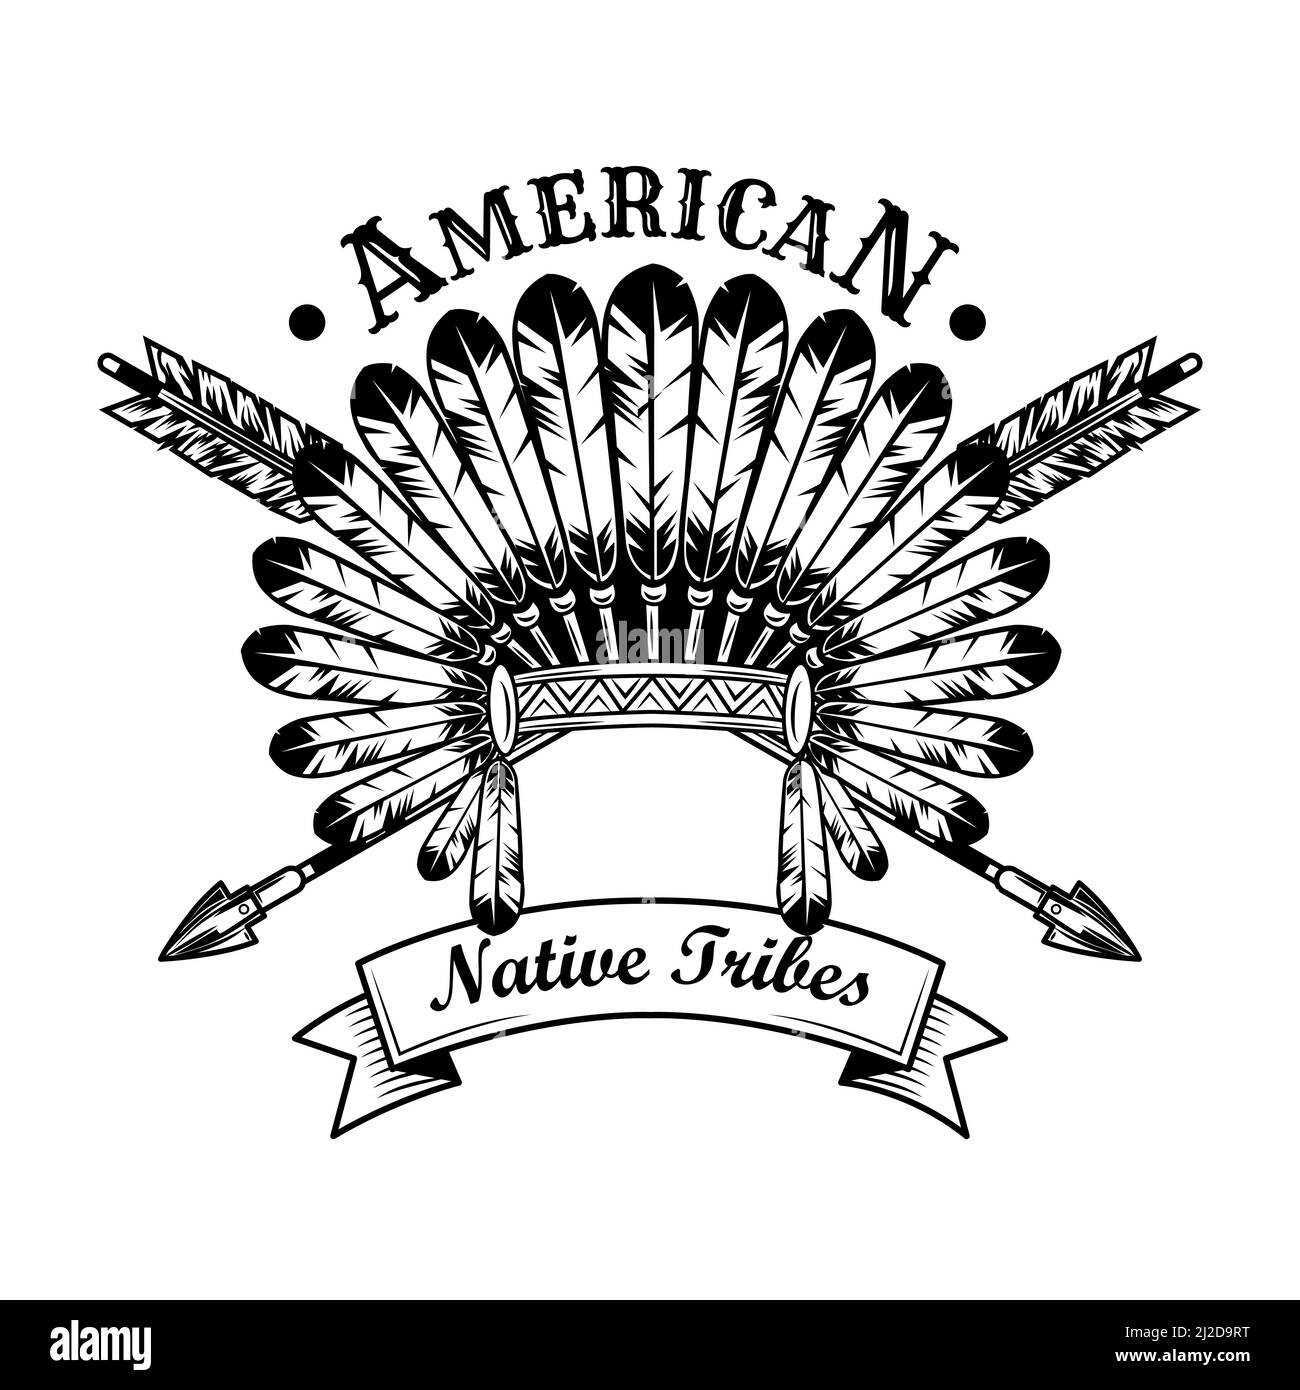 Native American tribe accessories vector illustration. Feather headdress, crossed arrows, text. Native Americans and Red Indian concept for emblems or Stock Vector